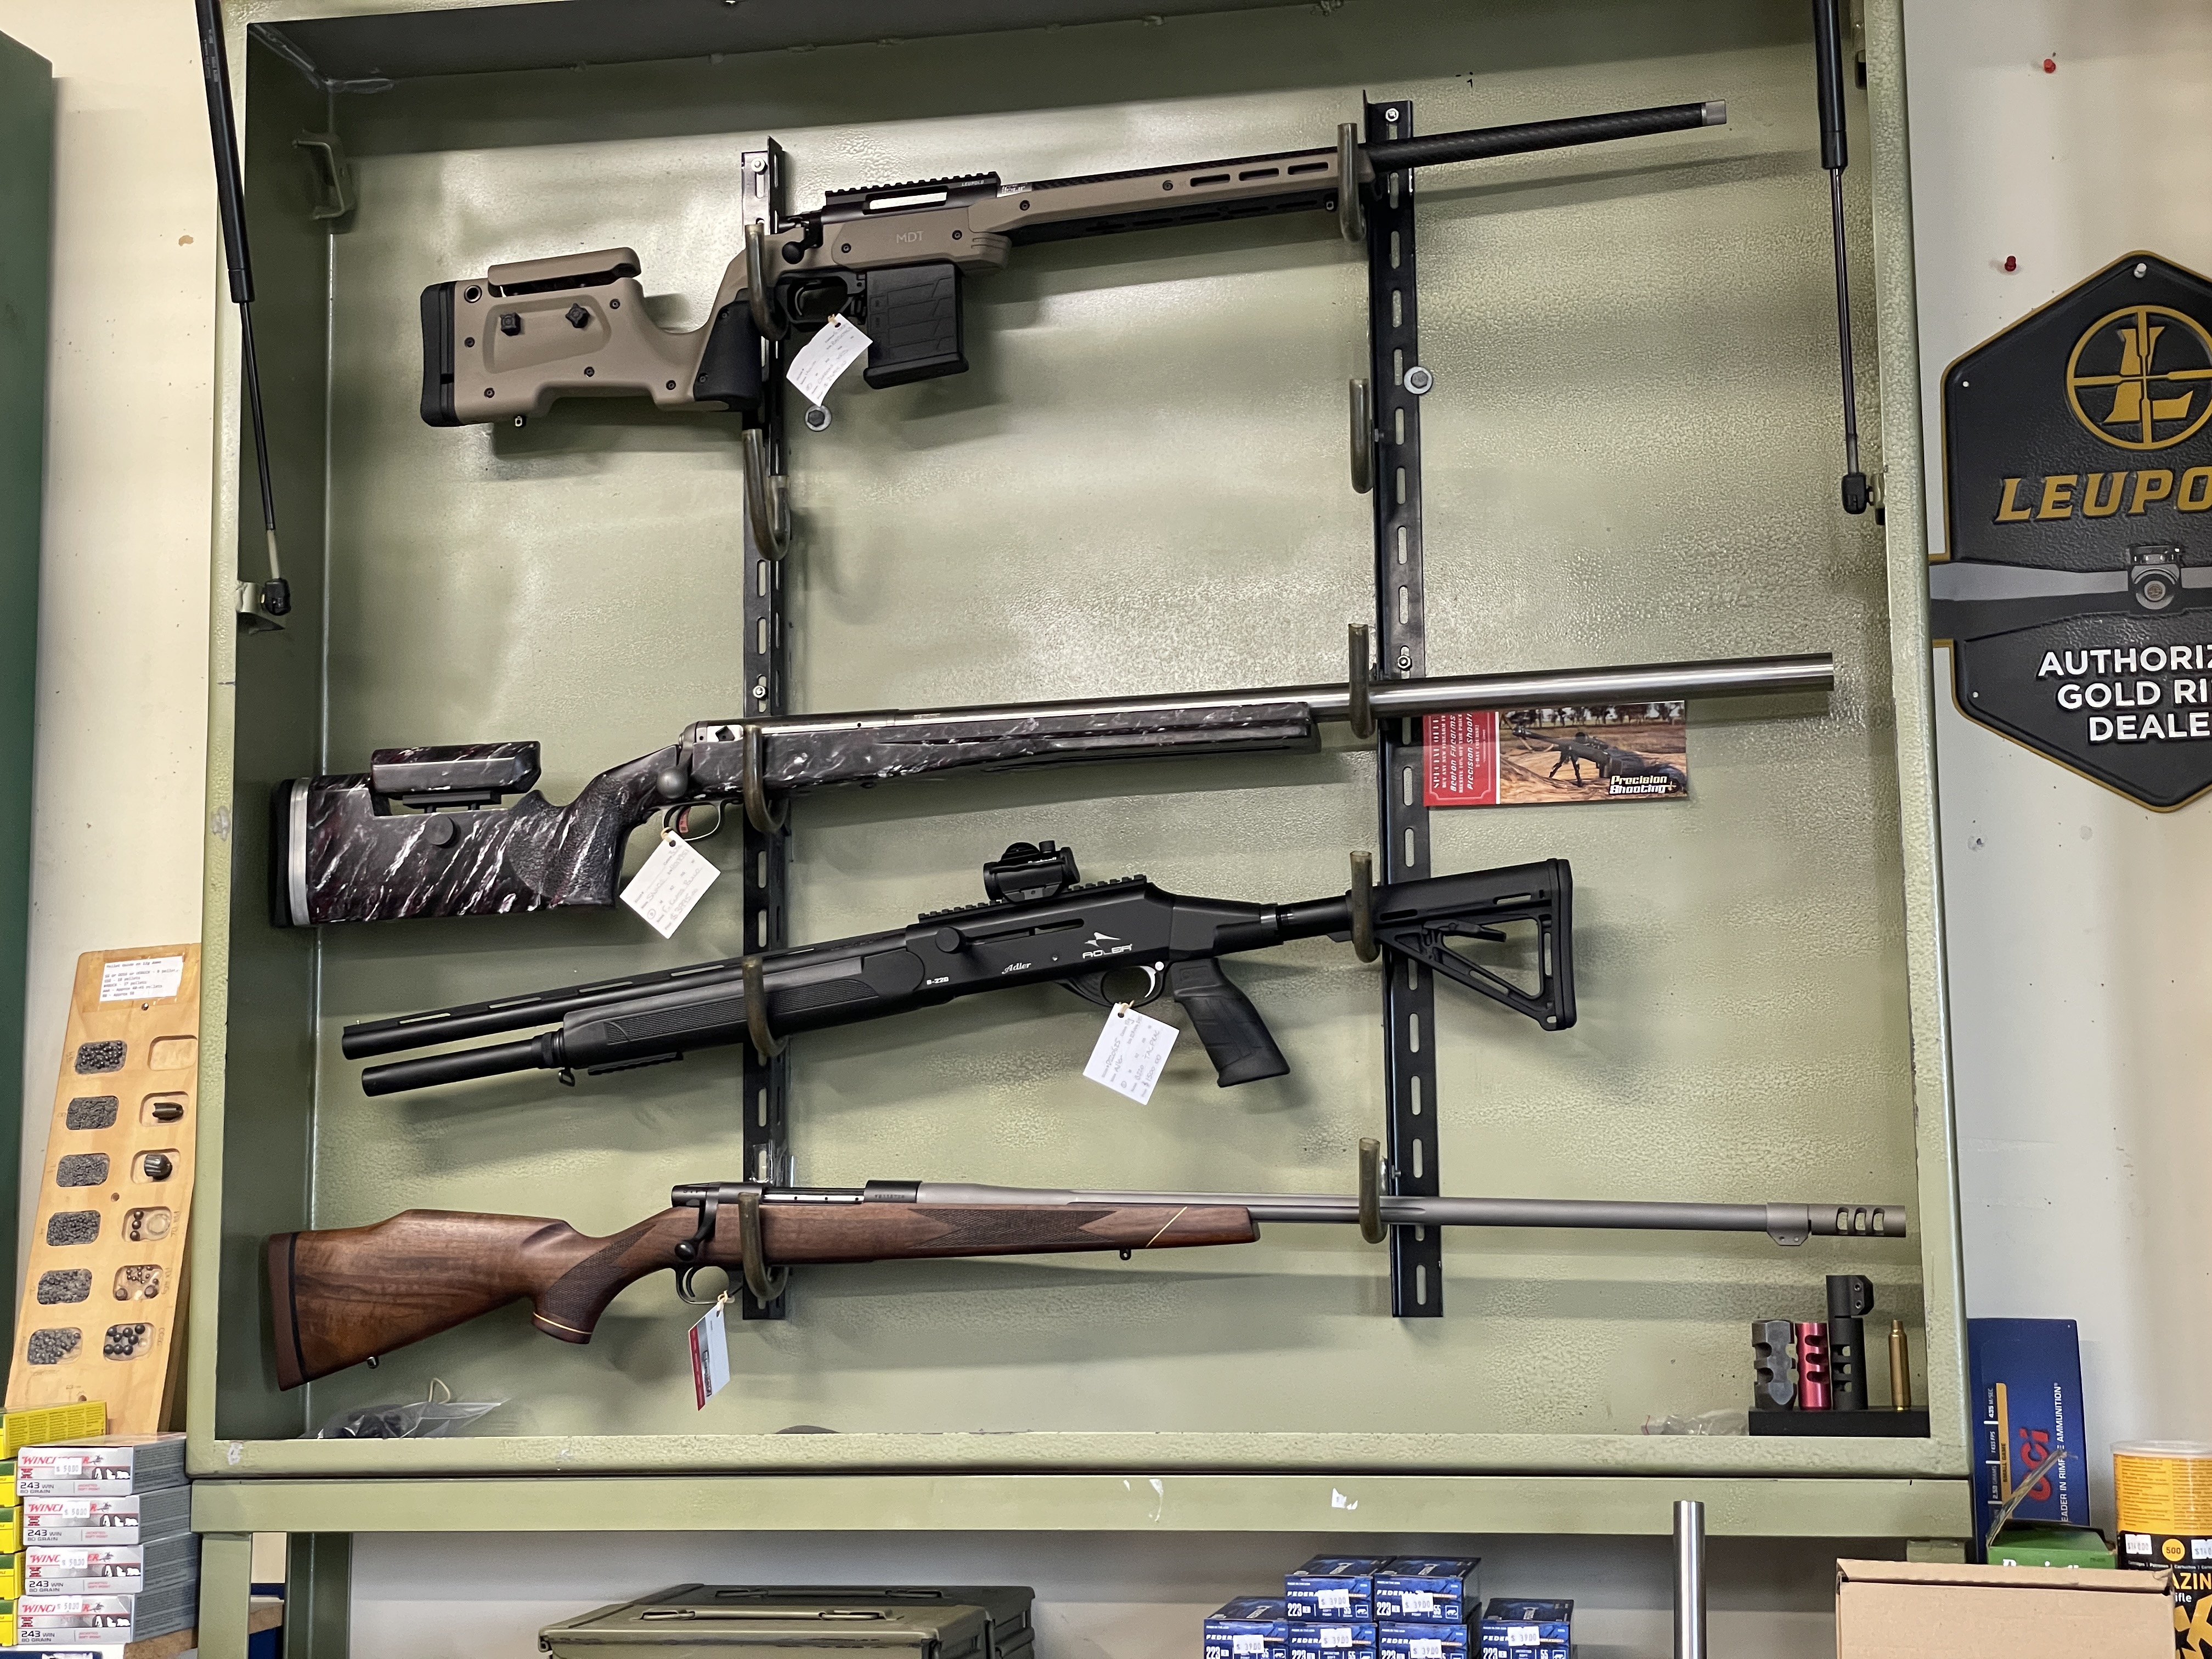 Bolt-action rifles on display in a gun store, identical in function but aesthetically different